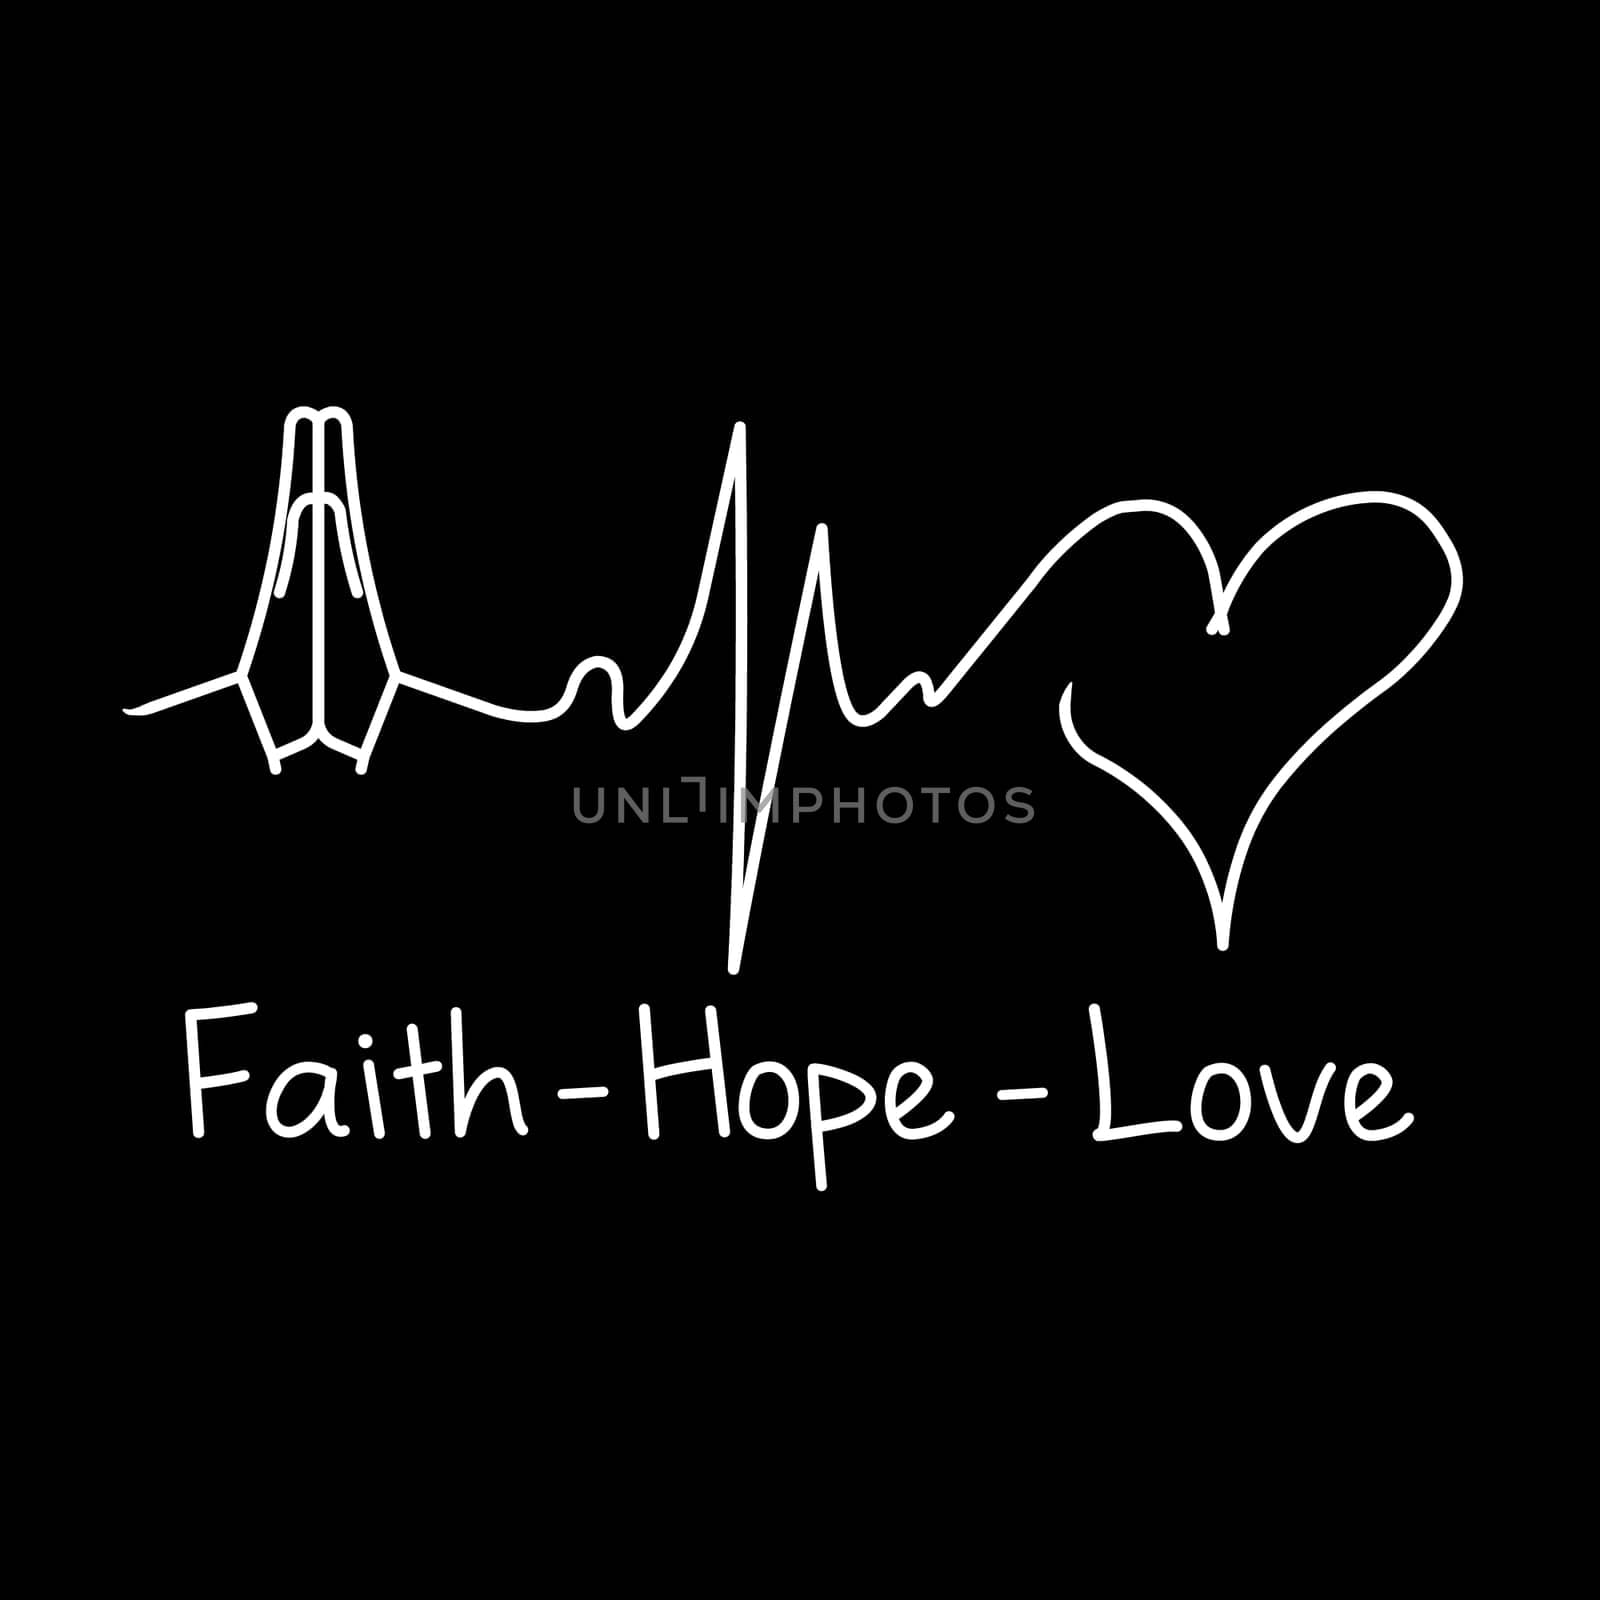 An heartbeat electrocardiogram demonstrating the faith, hope and love symbols with the three texts below.